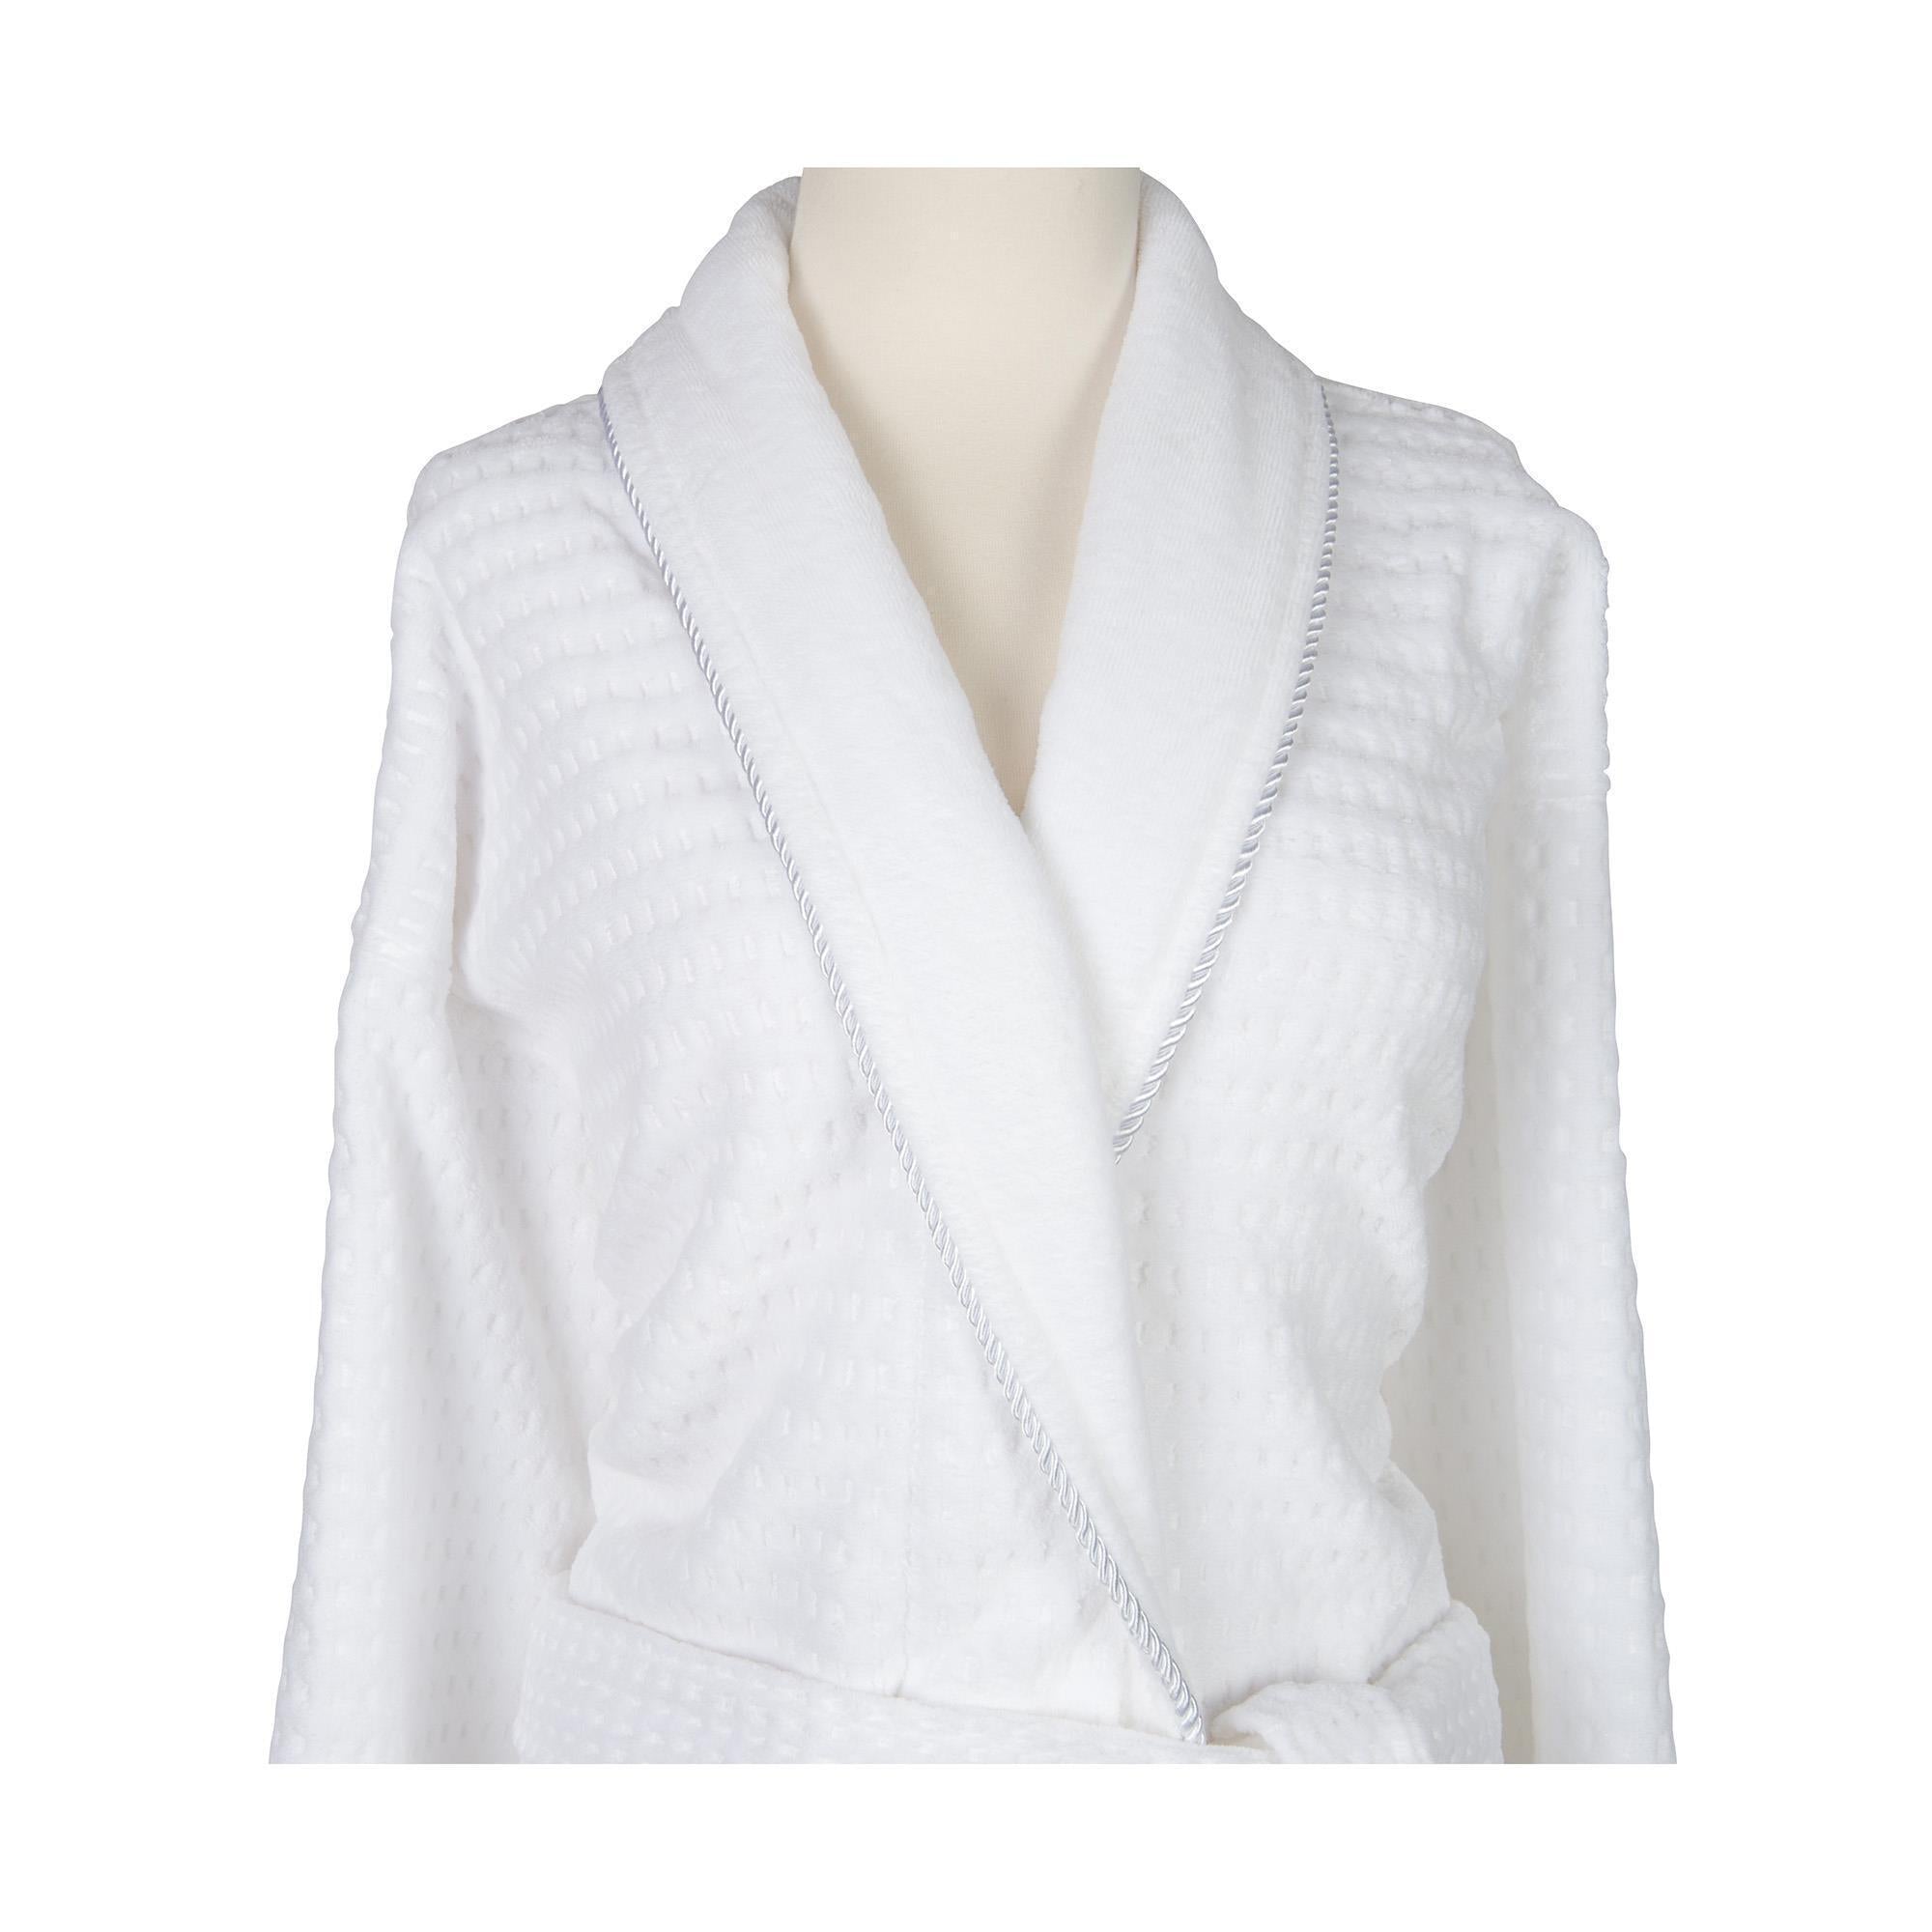 Robes & Wrapes Sposh Regal Robe White with Silver Braided Trim